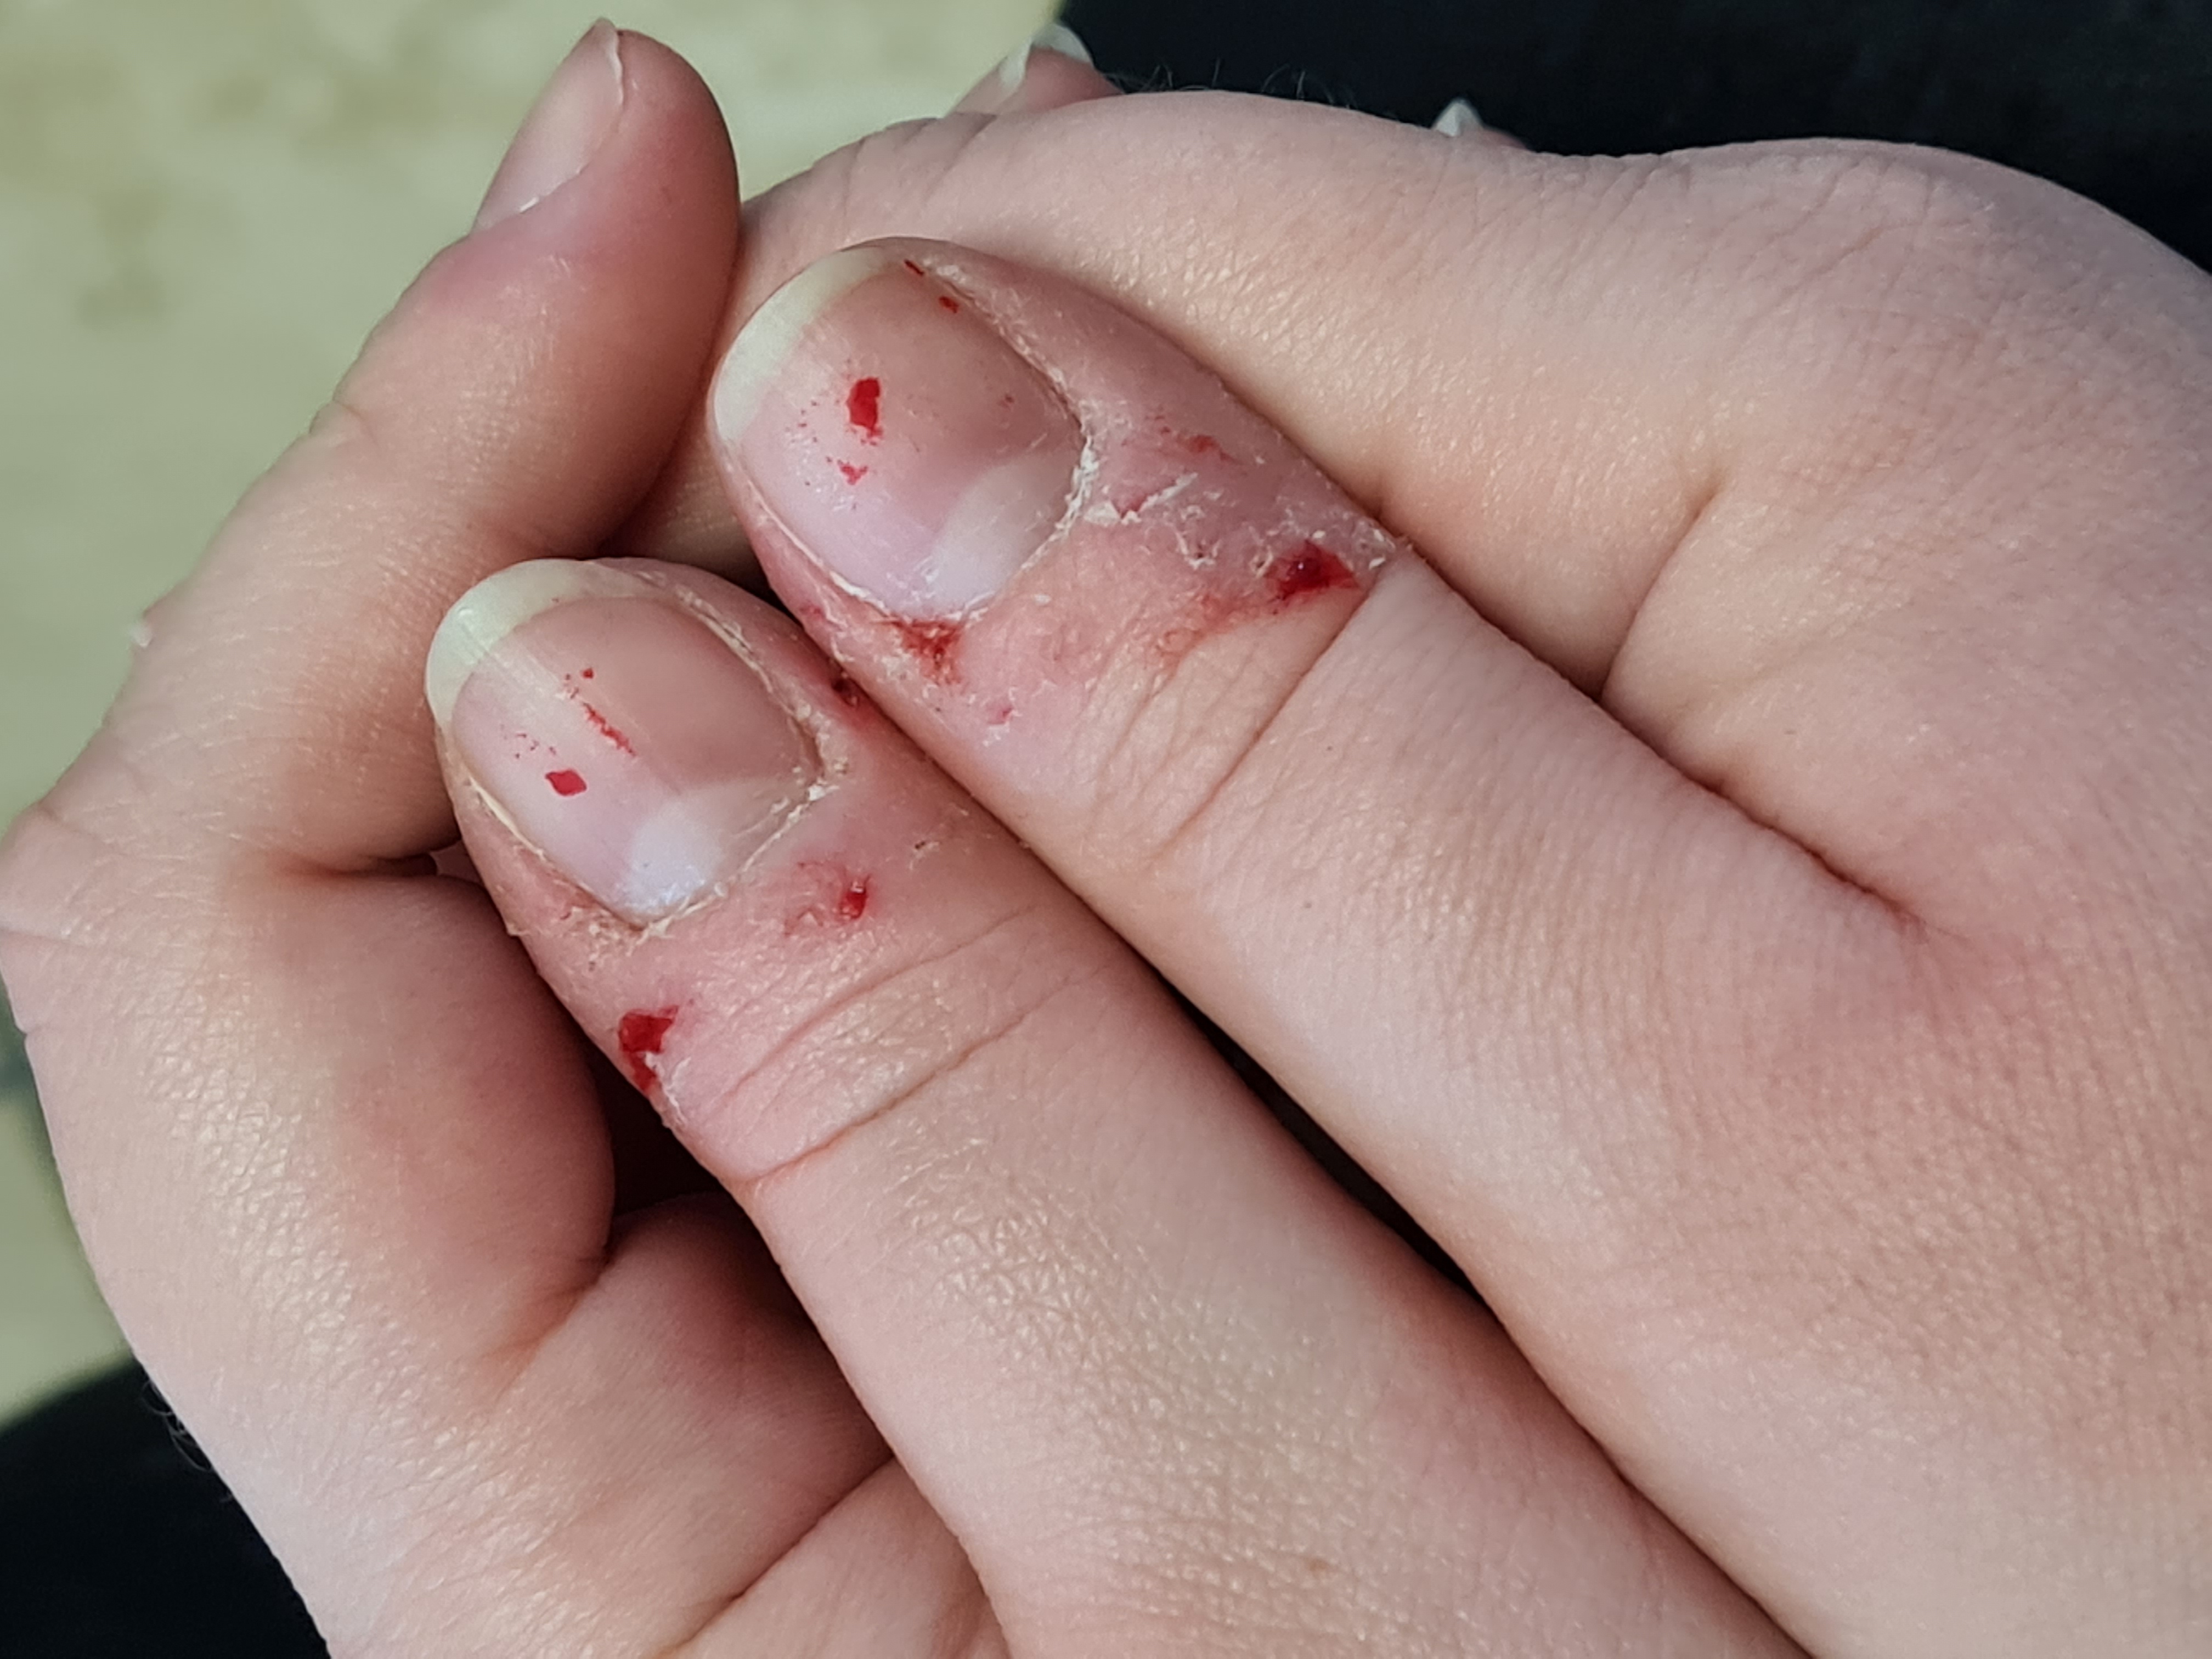 A picture of fingers with the skin picked and bloody, due to Dermatillomania - a representation of anxiety. 